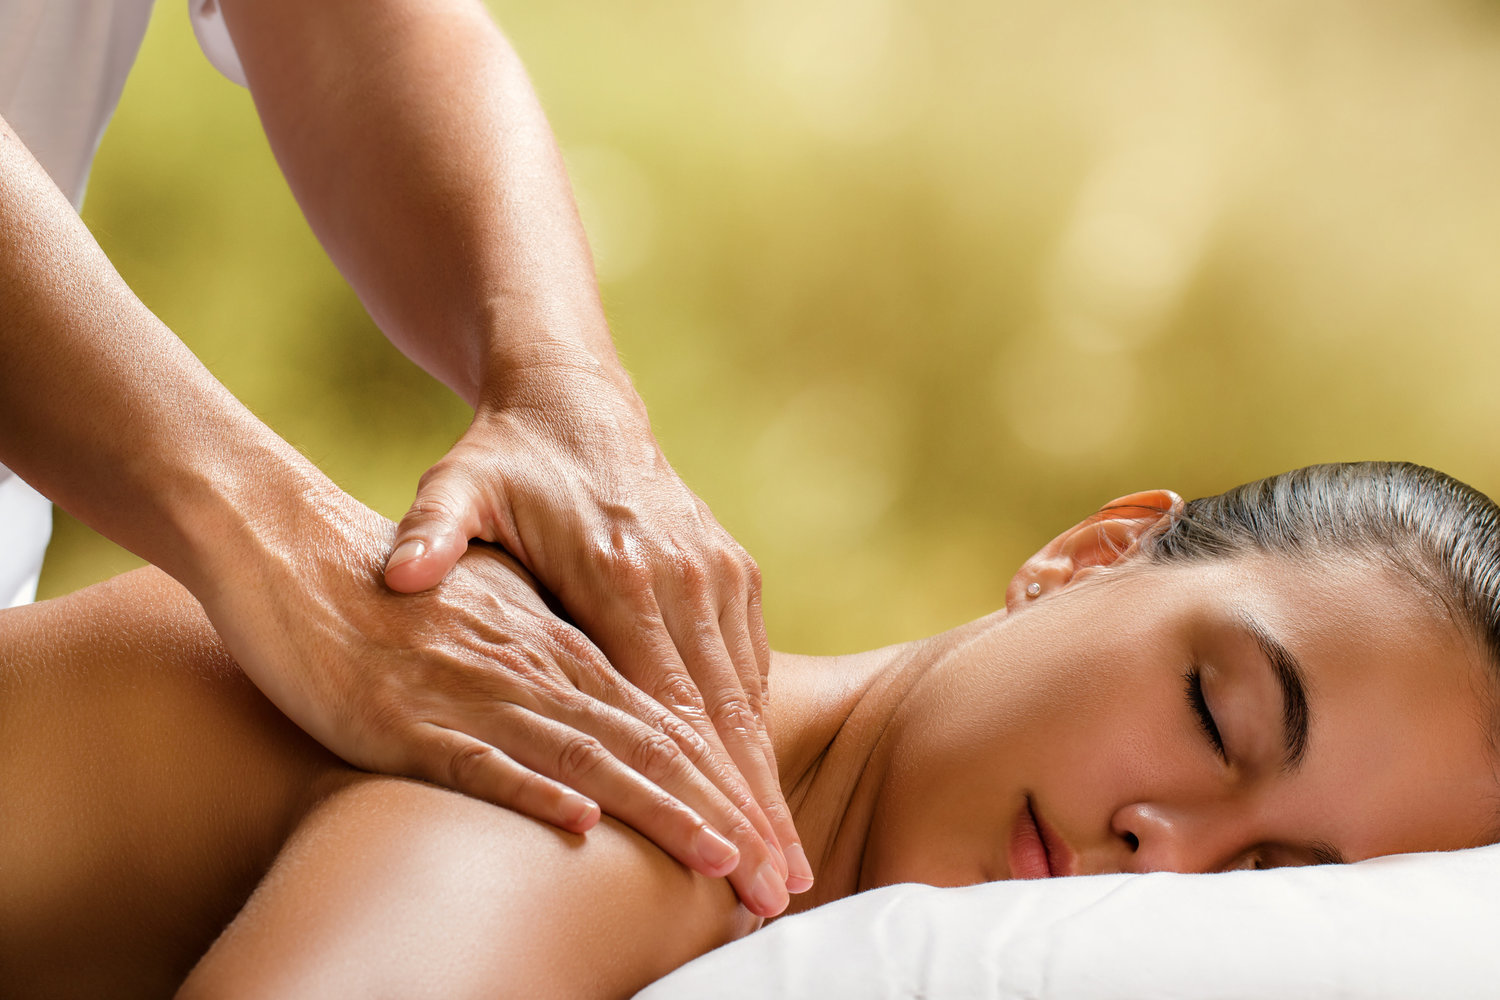 The Beautiful and Sensual Art of Giving a Tantric Massage